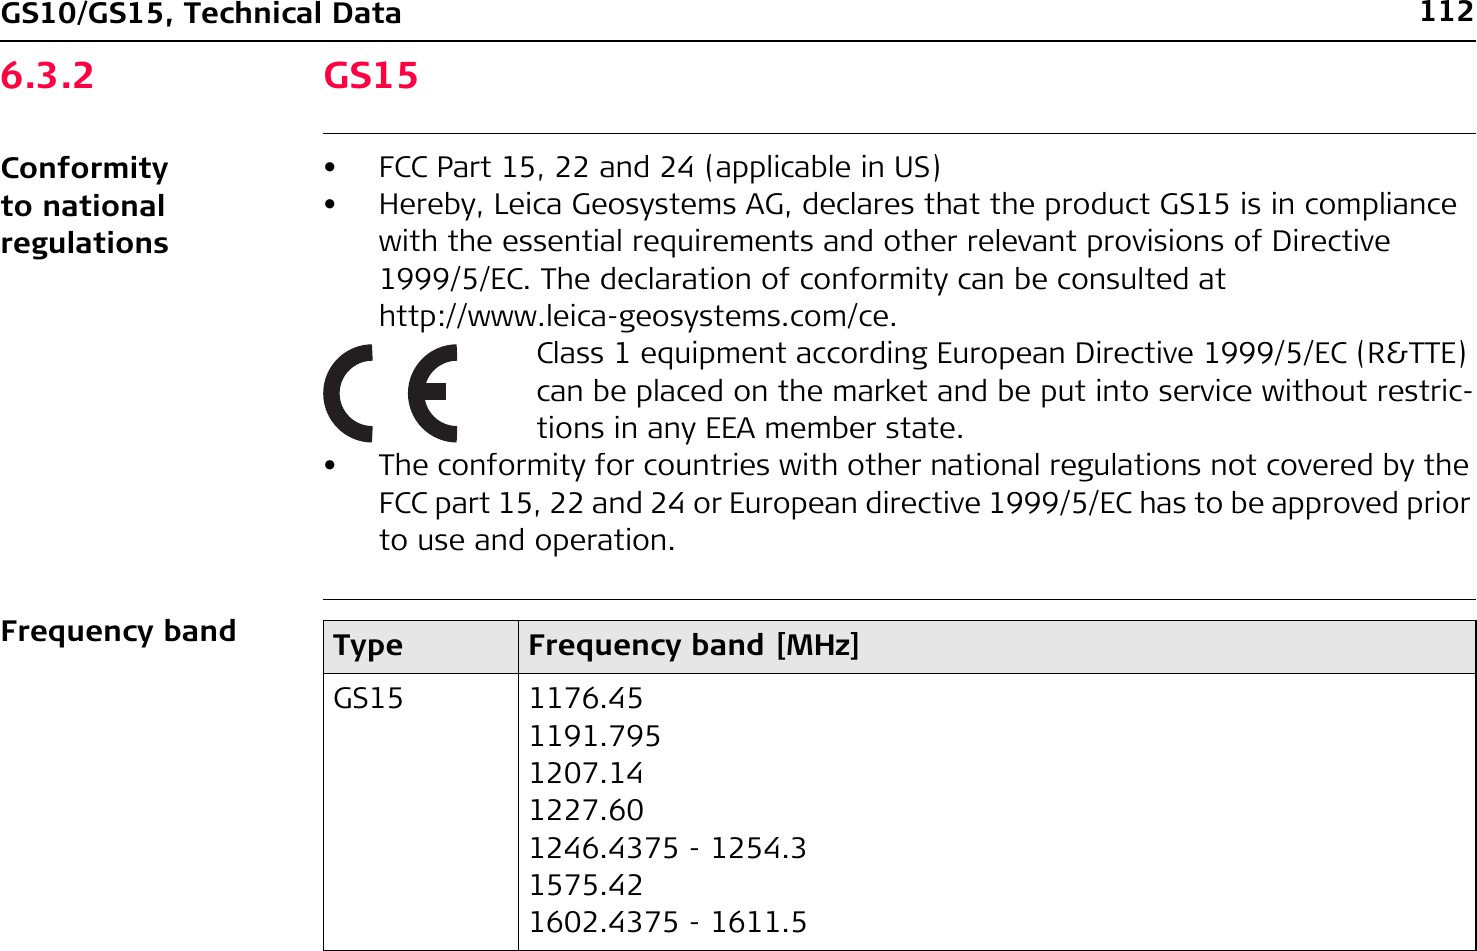 112GS10/GS15, Technical Data6.3.2 GS15Conformity to national regulationsFrequency band• FCC Part 15, 22 and 24 (applicable in US)• Hereby, Leica Geosystems AG, declares that the product GS15 is in compliance with the essential requirements and other relevant provisions of Directive 1999/5/EC. The declaration of conformity can be consulted at http://www.leica-geosystems.com/ce.Class 1 equipment according European Directive 1999/5/EC (R&amp;TTE) can be placed on the market and be put into service without restric-tions in any EEA member state.• The conformity for countries with other national regulations not covered by the FCC part 15, 22 and 24 or European directive 1999/5/EC has to be approved prior to use and operation.Type Frequency band [MHz]GS15 1176.451191.7951207.141227.601246.4375 - 1254.31575.421602.4375 - 1611.5